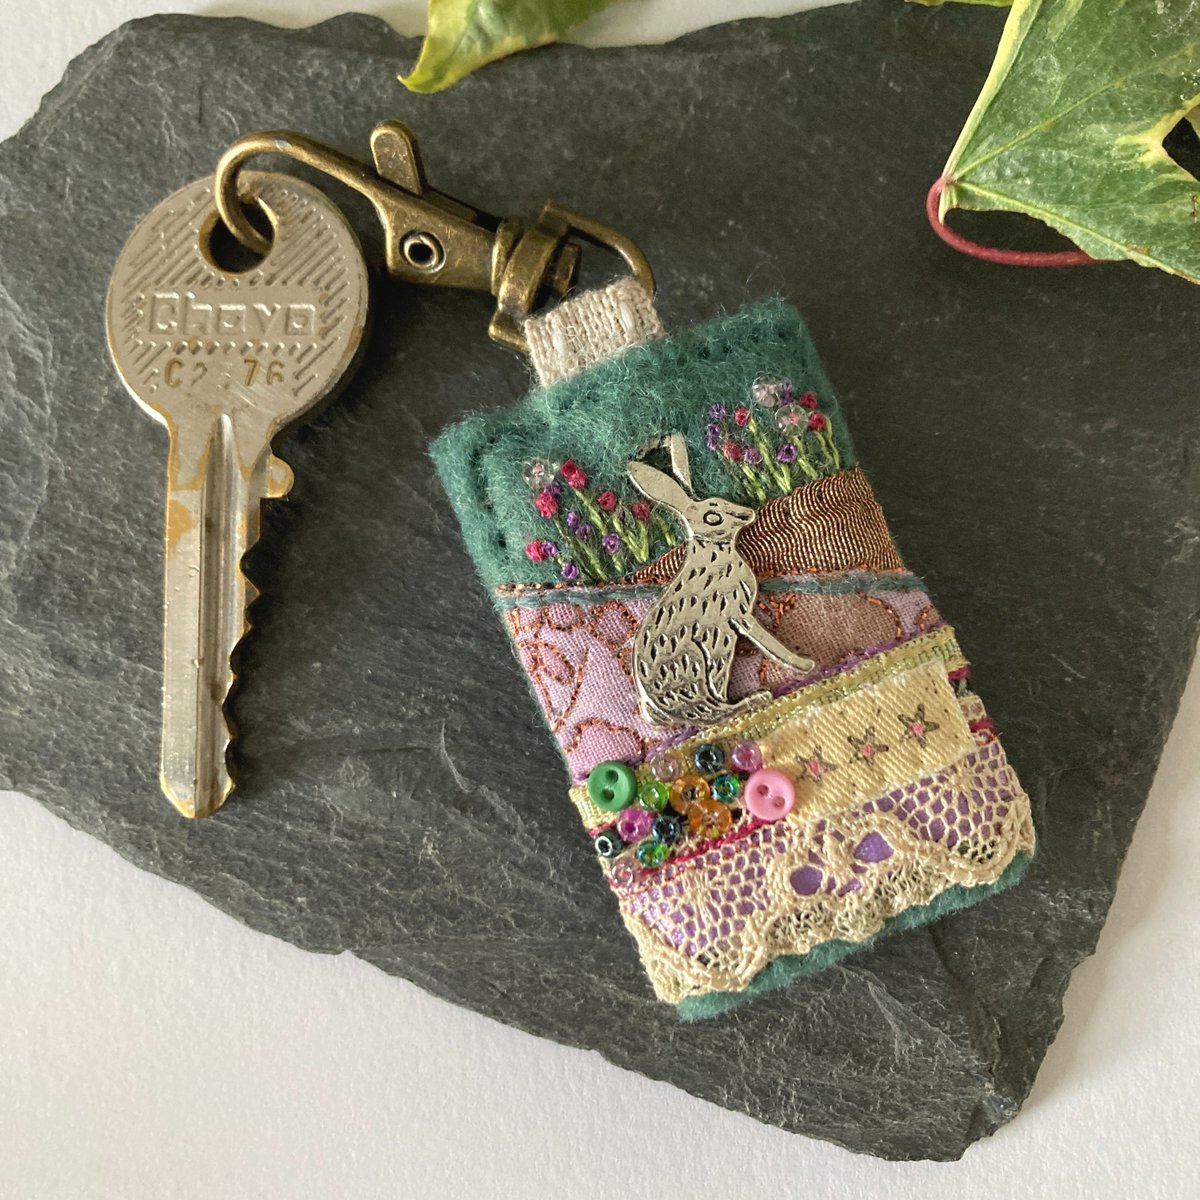 Elegant hare clip accessory to decorate bags, keys & spiral bound notebook journals. Hand sewn from mixed fabrics with trims, embellishments and stitching. Pretty #giftideas by Ellie's Treasures, #Lincolnshire. elliestreasures.square.site/product/hare-c… #earlybiz #mhhsbd #shopindie #naturelovers